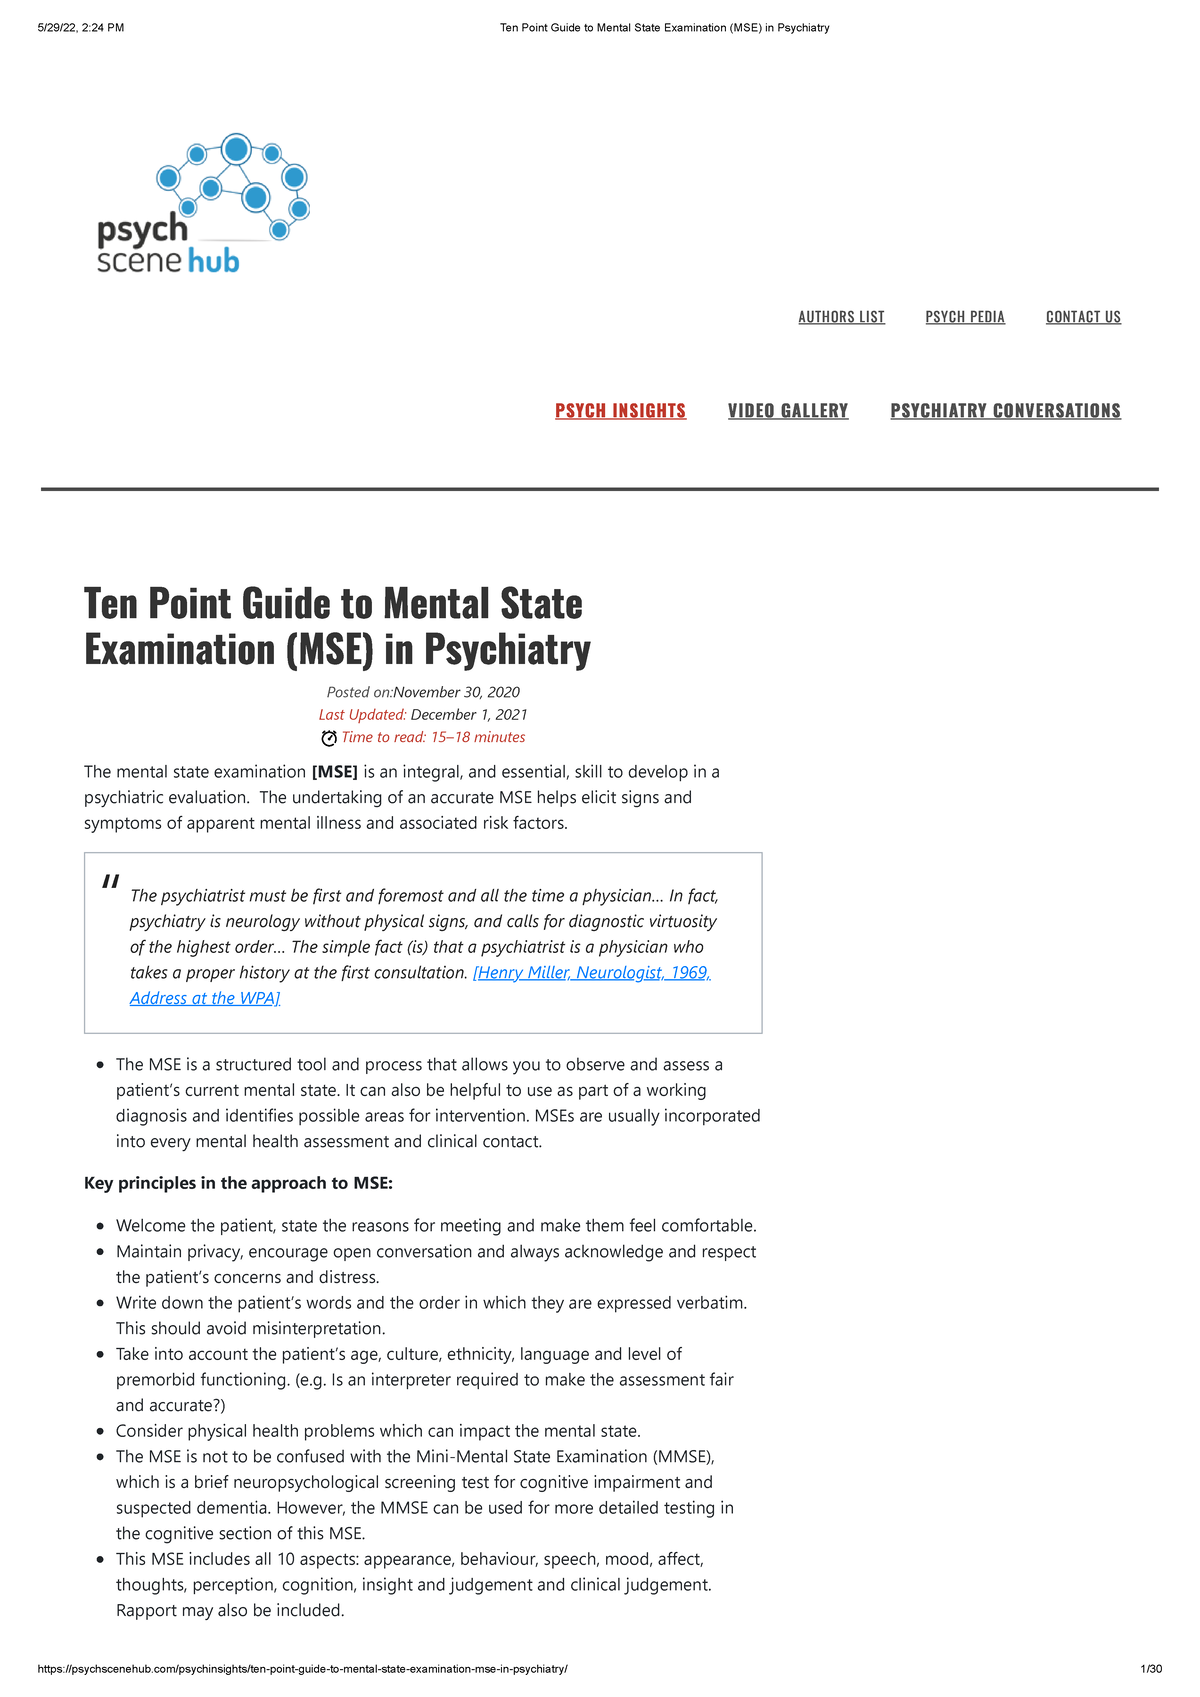 Ten Point Guide to Mental State Examination (MSE) in Psychiatry